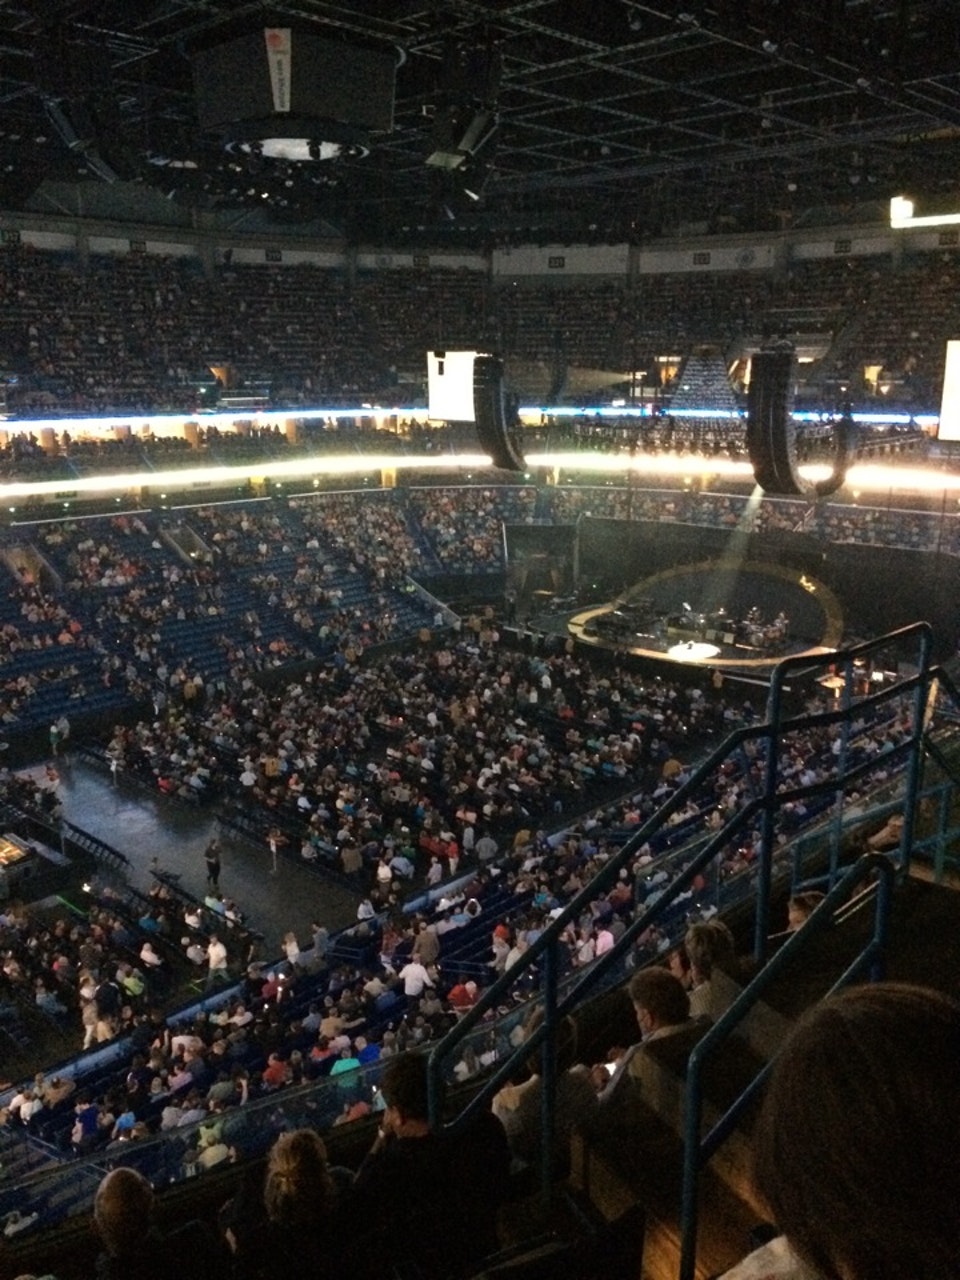 section 303, row 6 seat view  for concert - smoothie king center